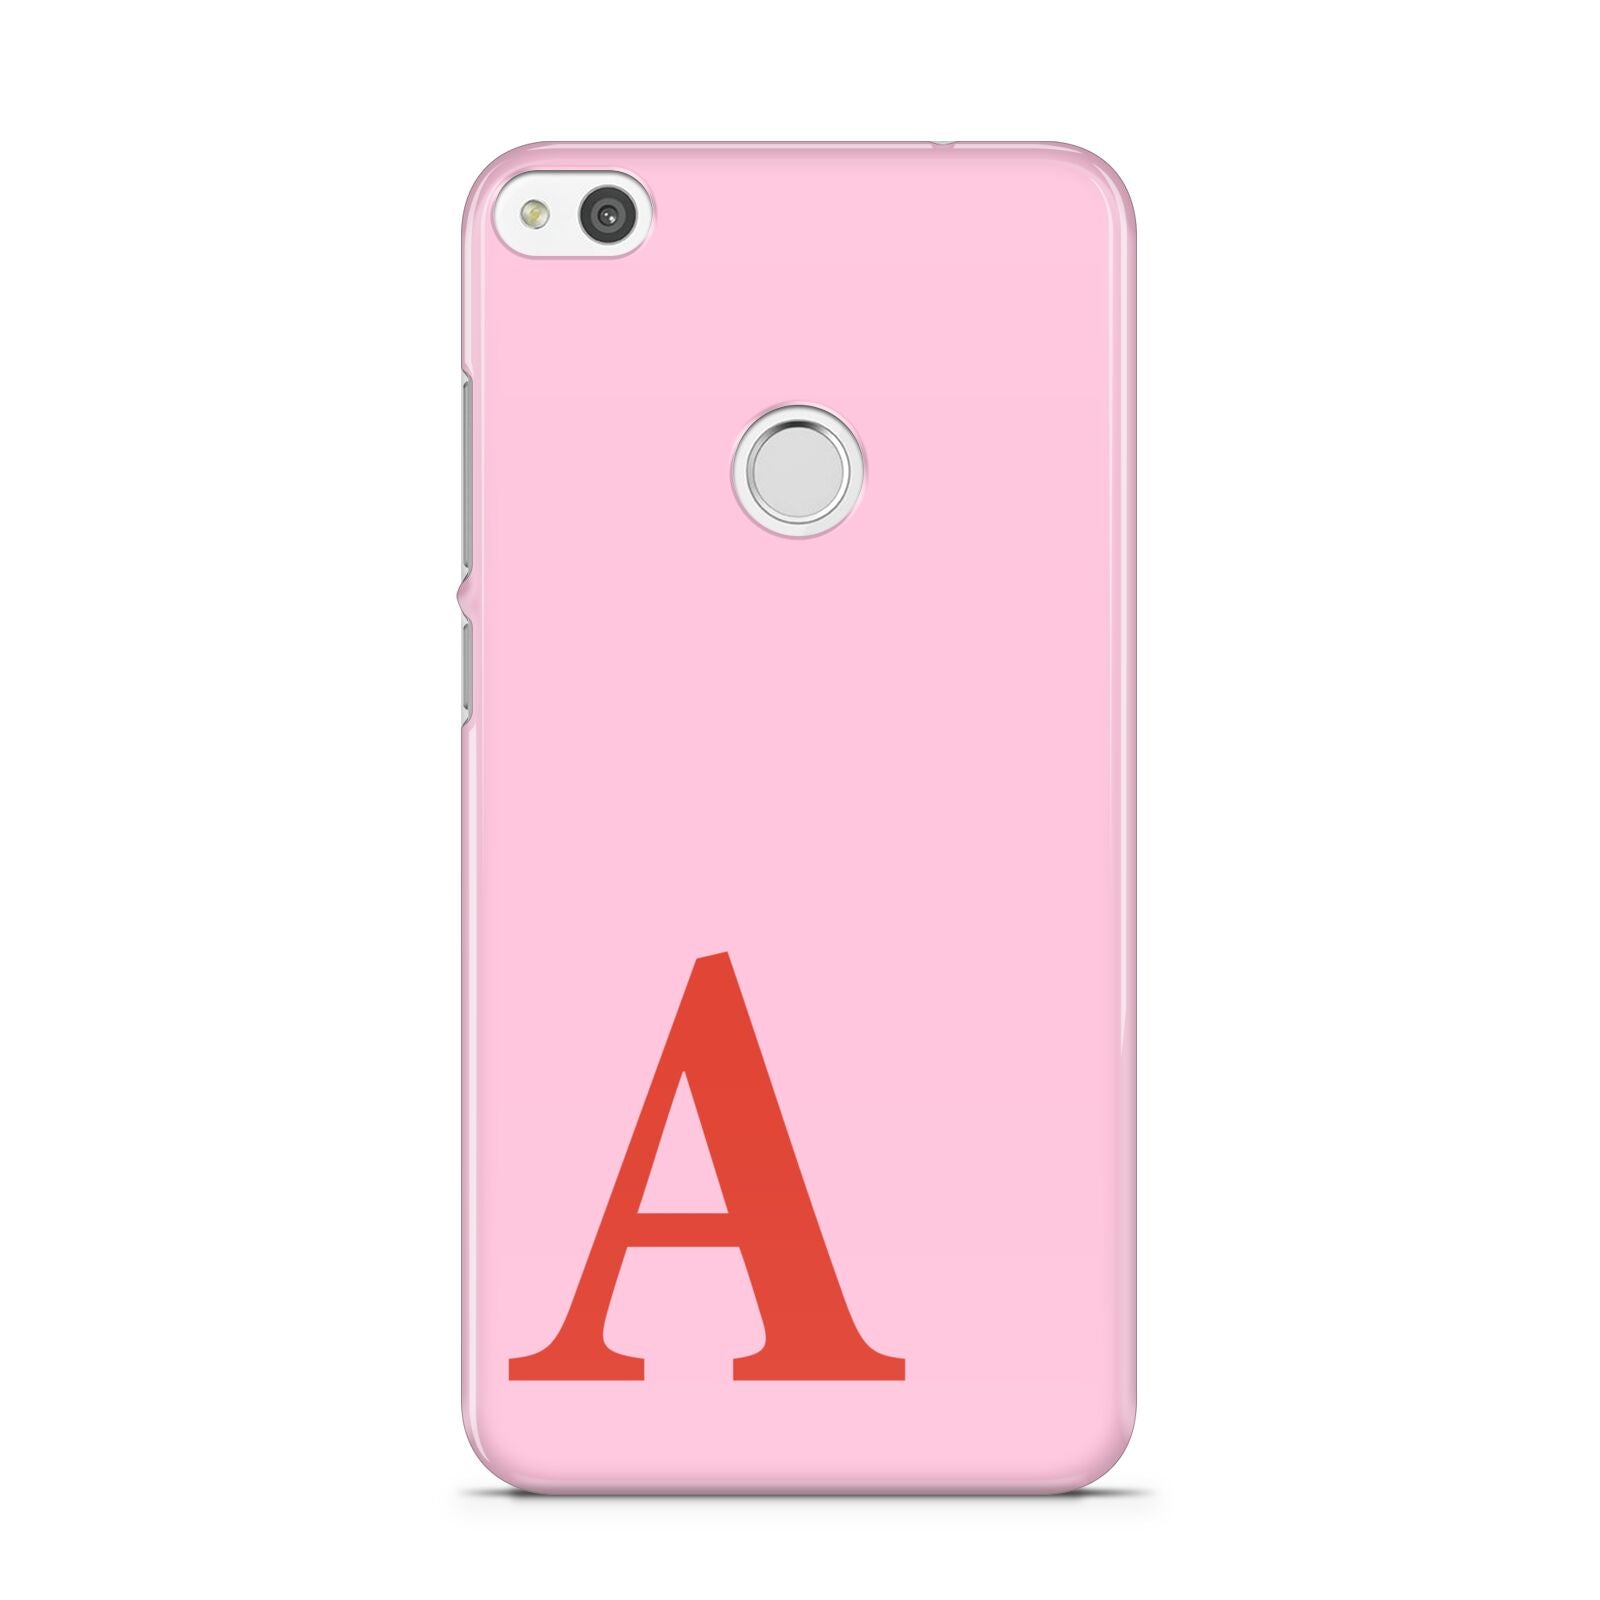 Personalised Pink and Red Huawei P8 Lite Case